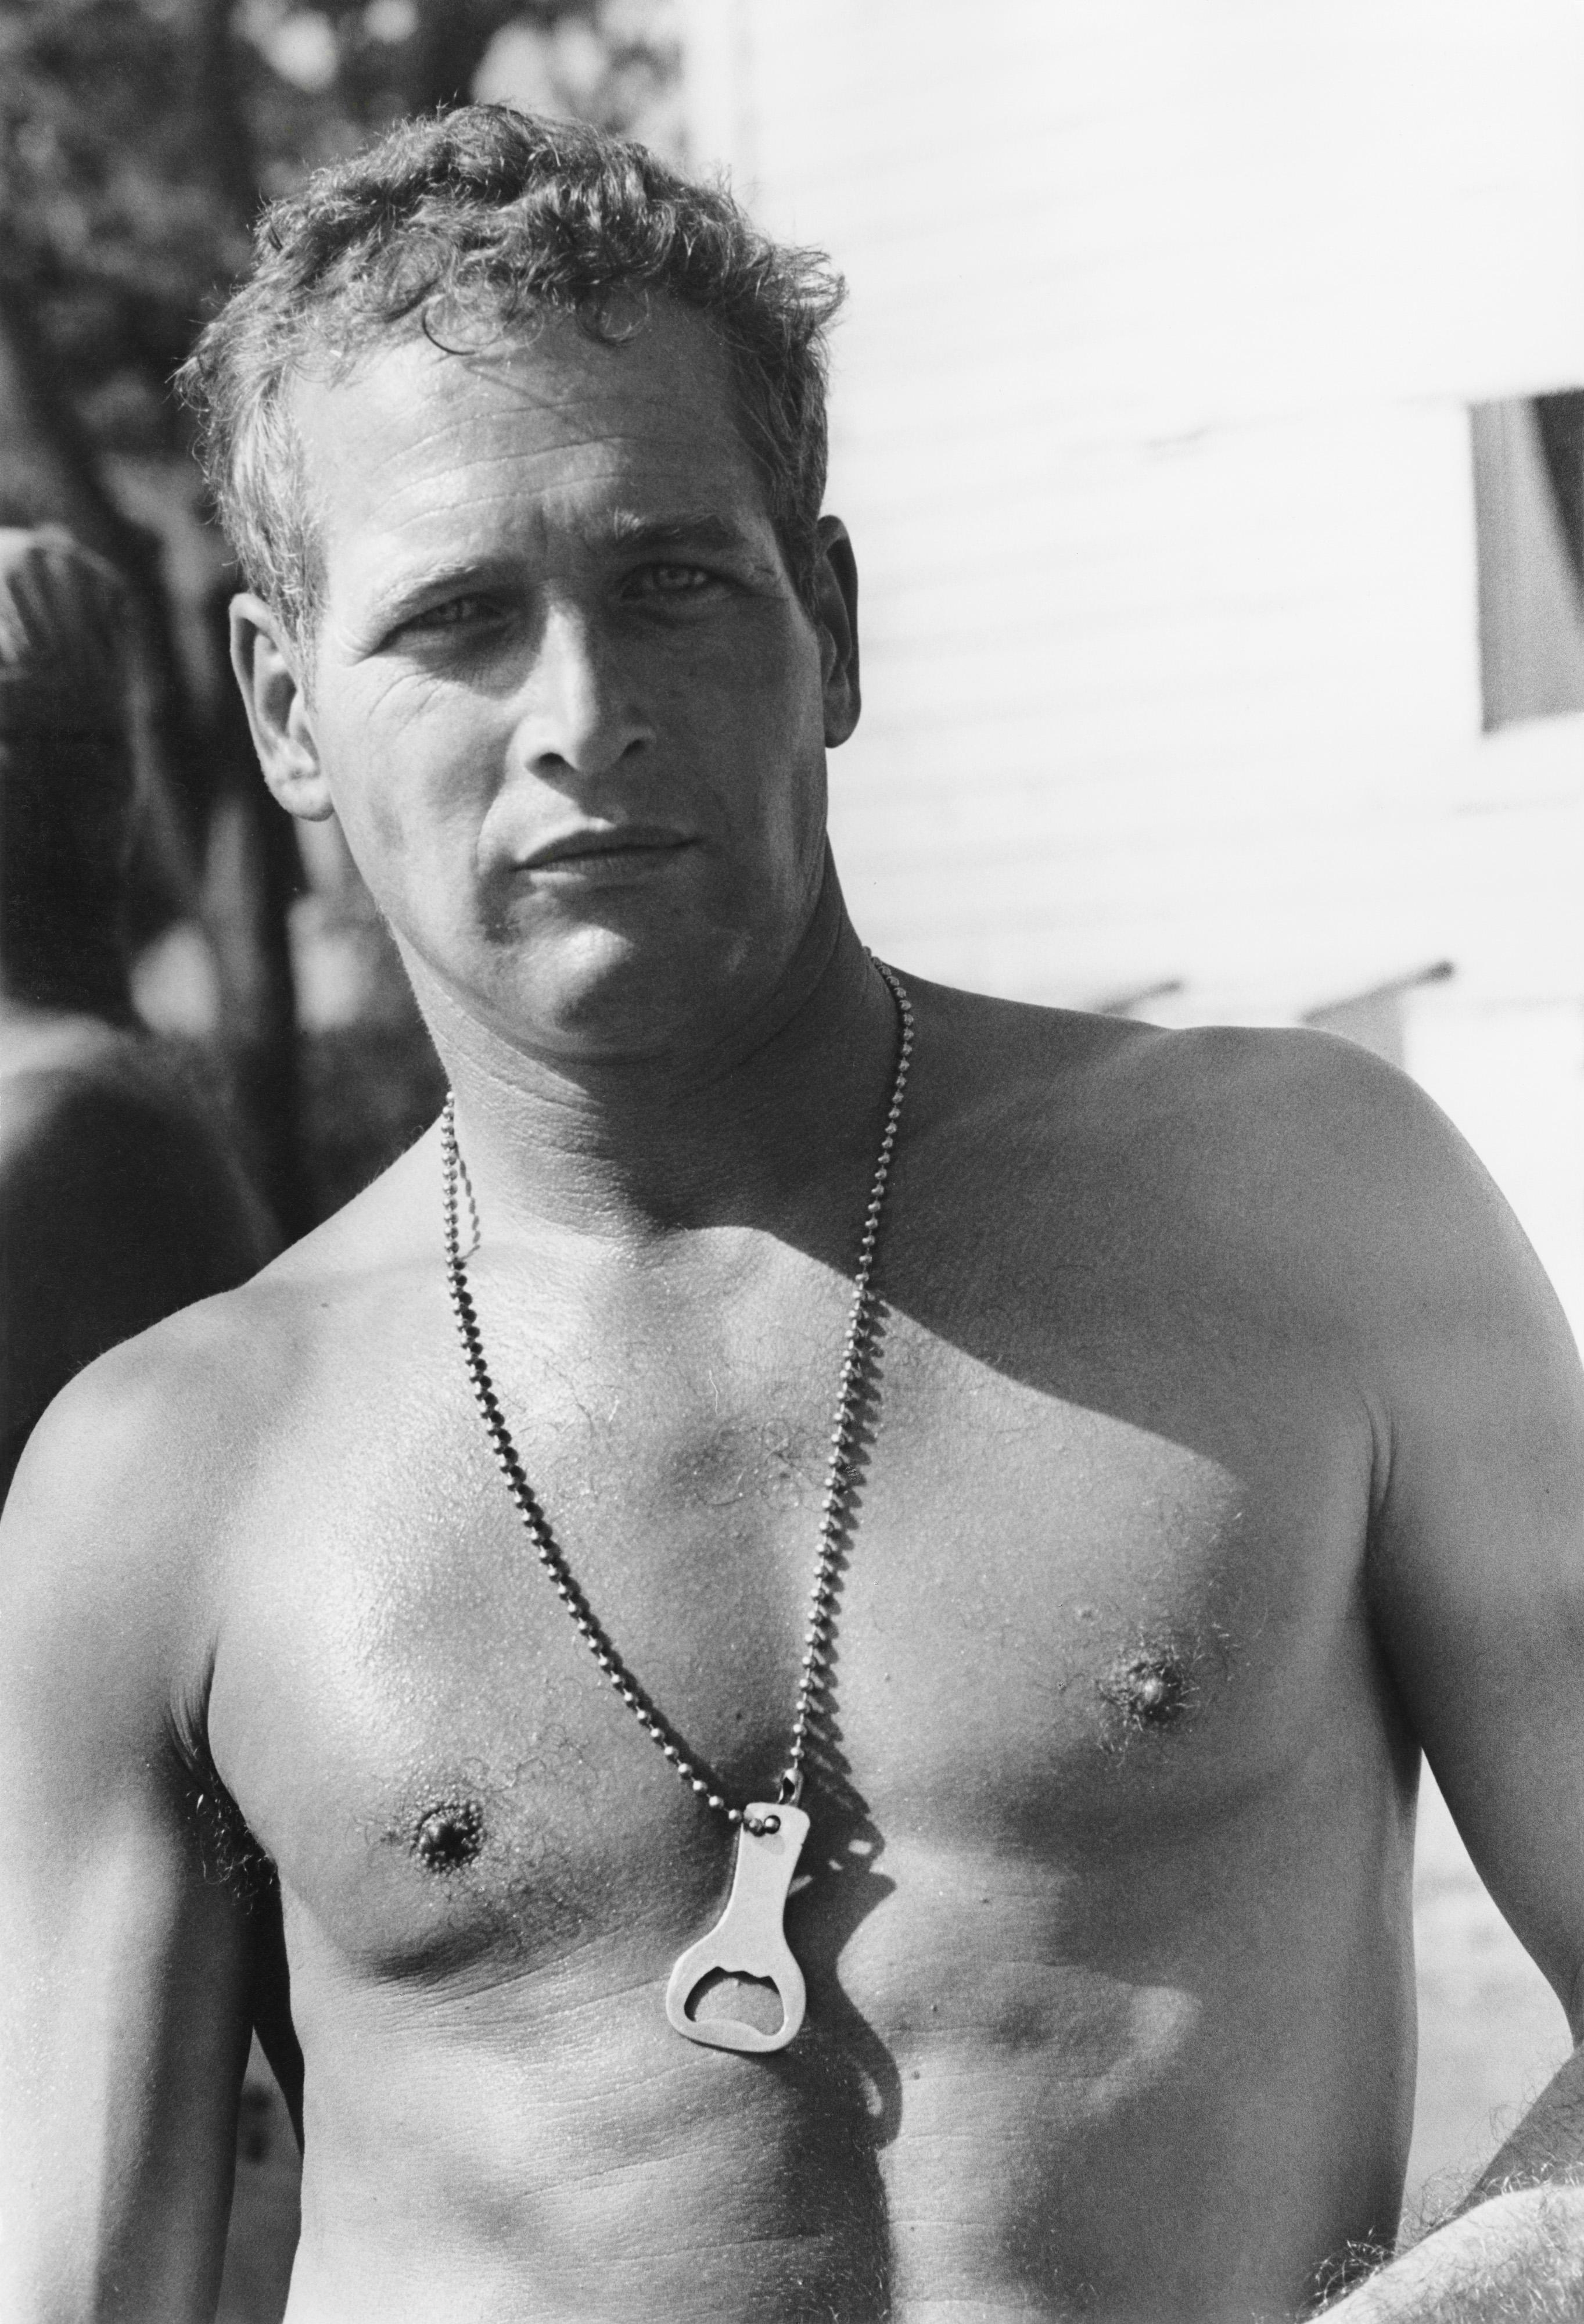 Black and White Photograph Lawrence Schiller - Paul Newman, « Cool Hand Luke », 1966